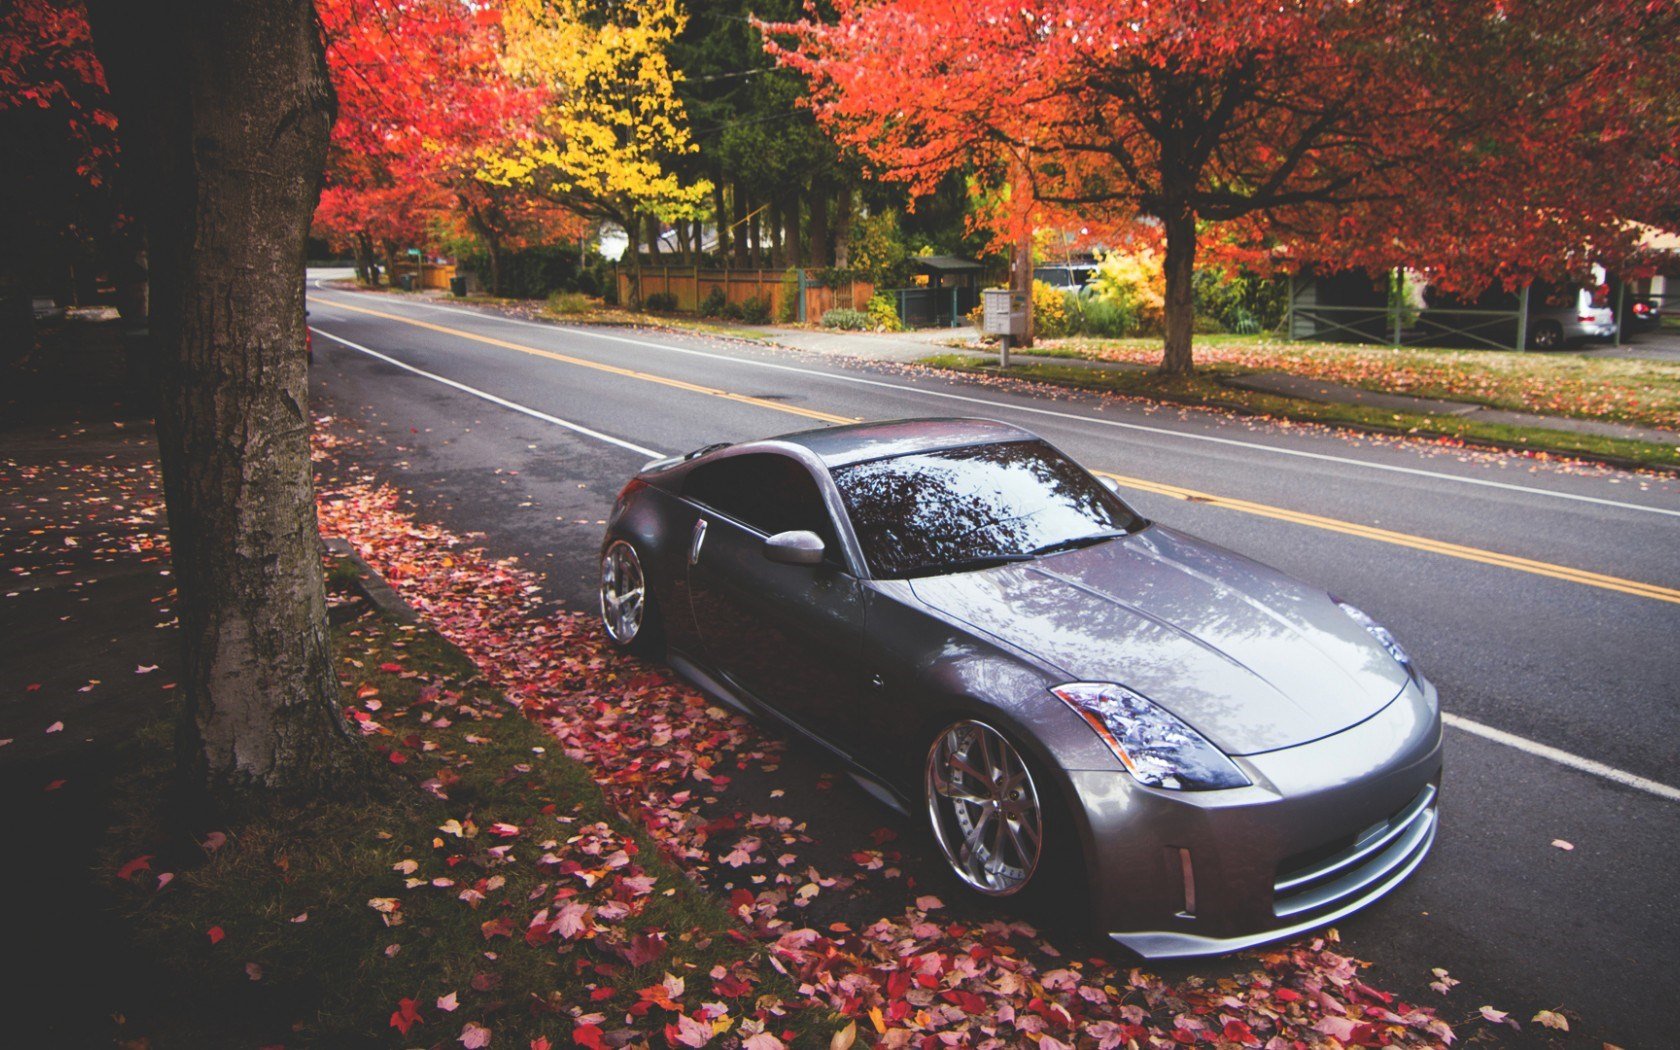 Free Download Nissan 350z Wallpaper Id 456802 Hd 1680x1050 For Desktop Images, Photos, Reviews